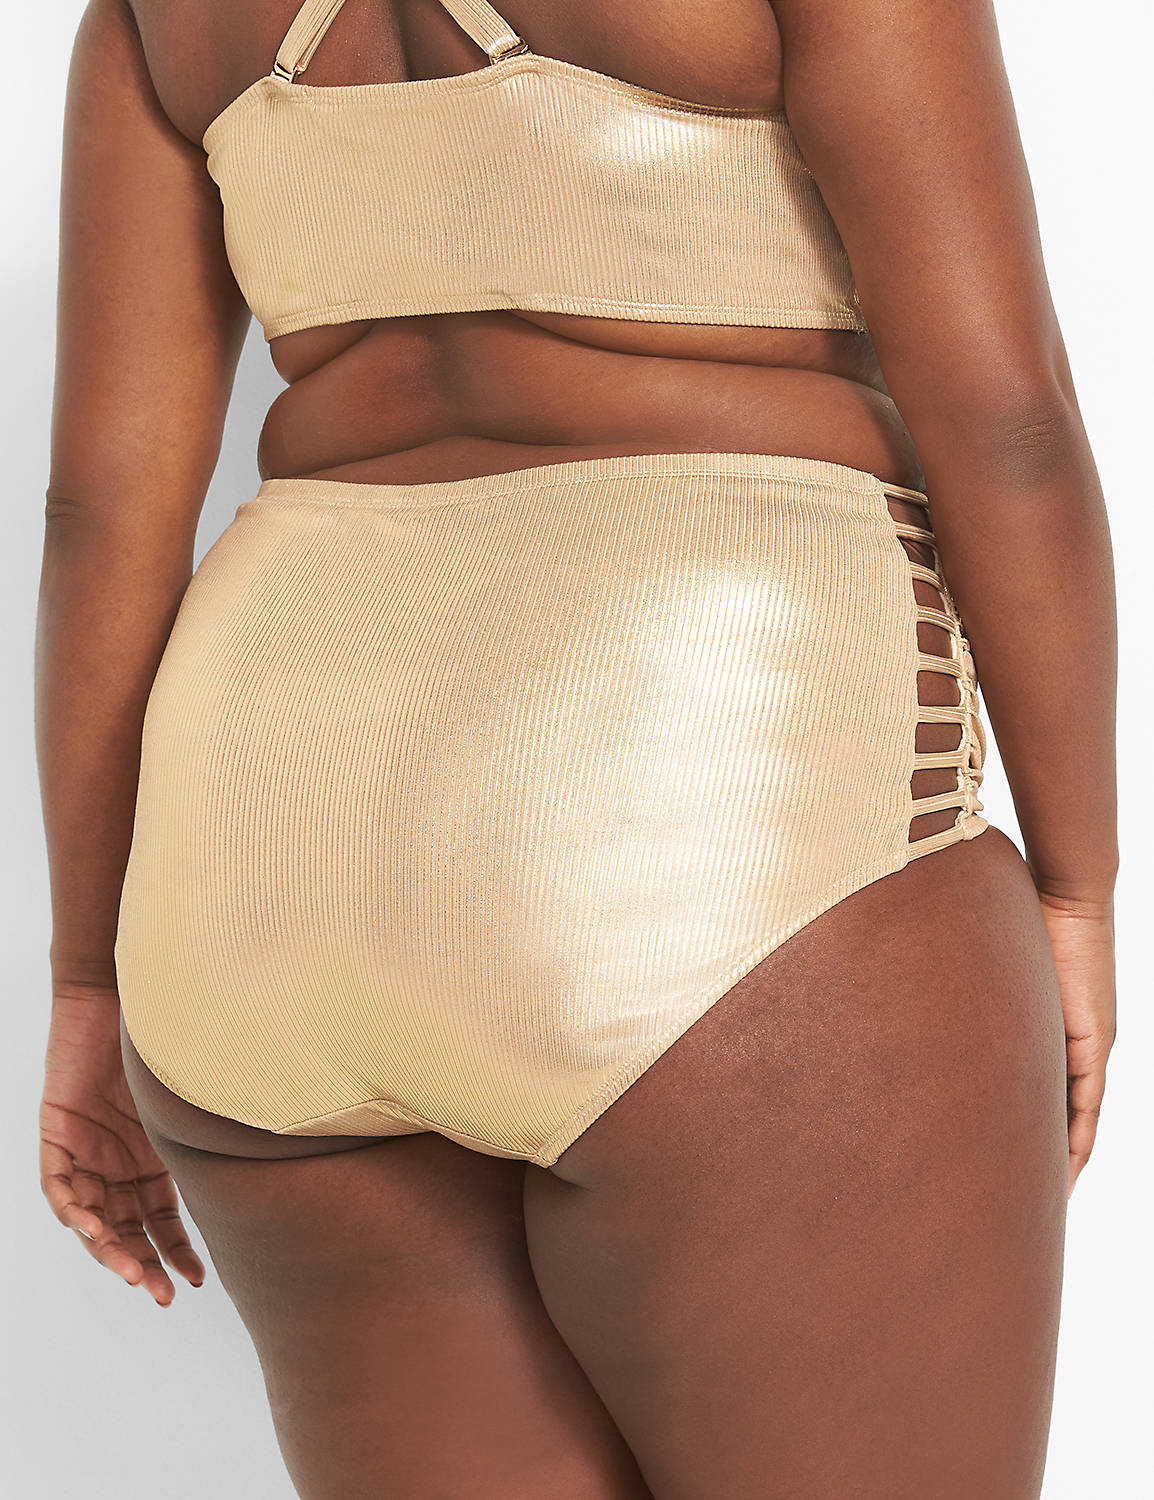 Ribbed Ruched Strappy Brief 1126135 Product Image 2